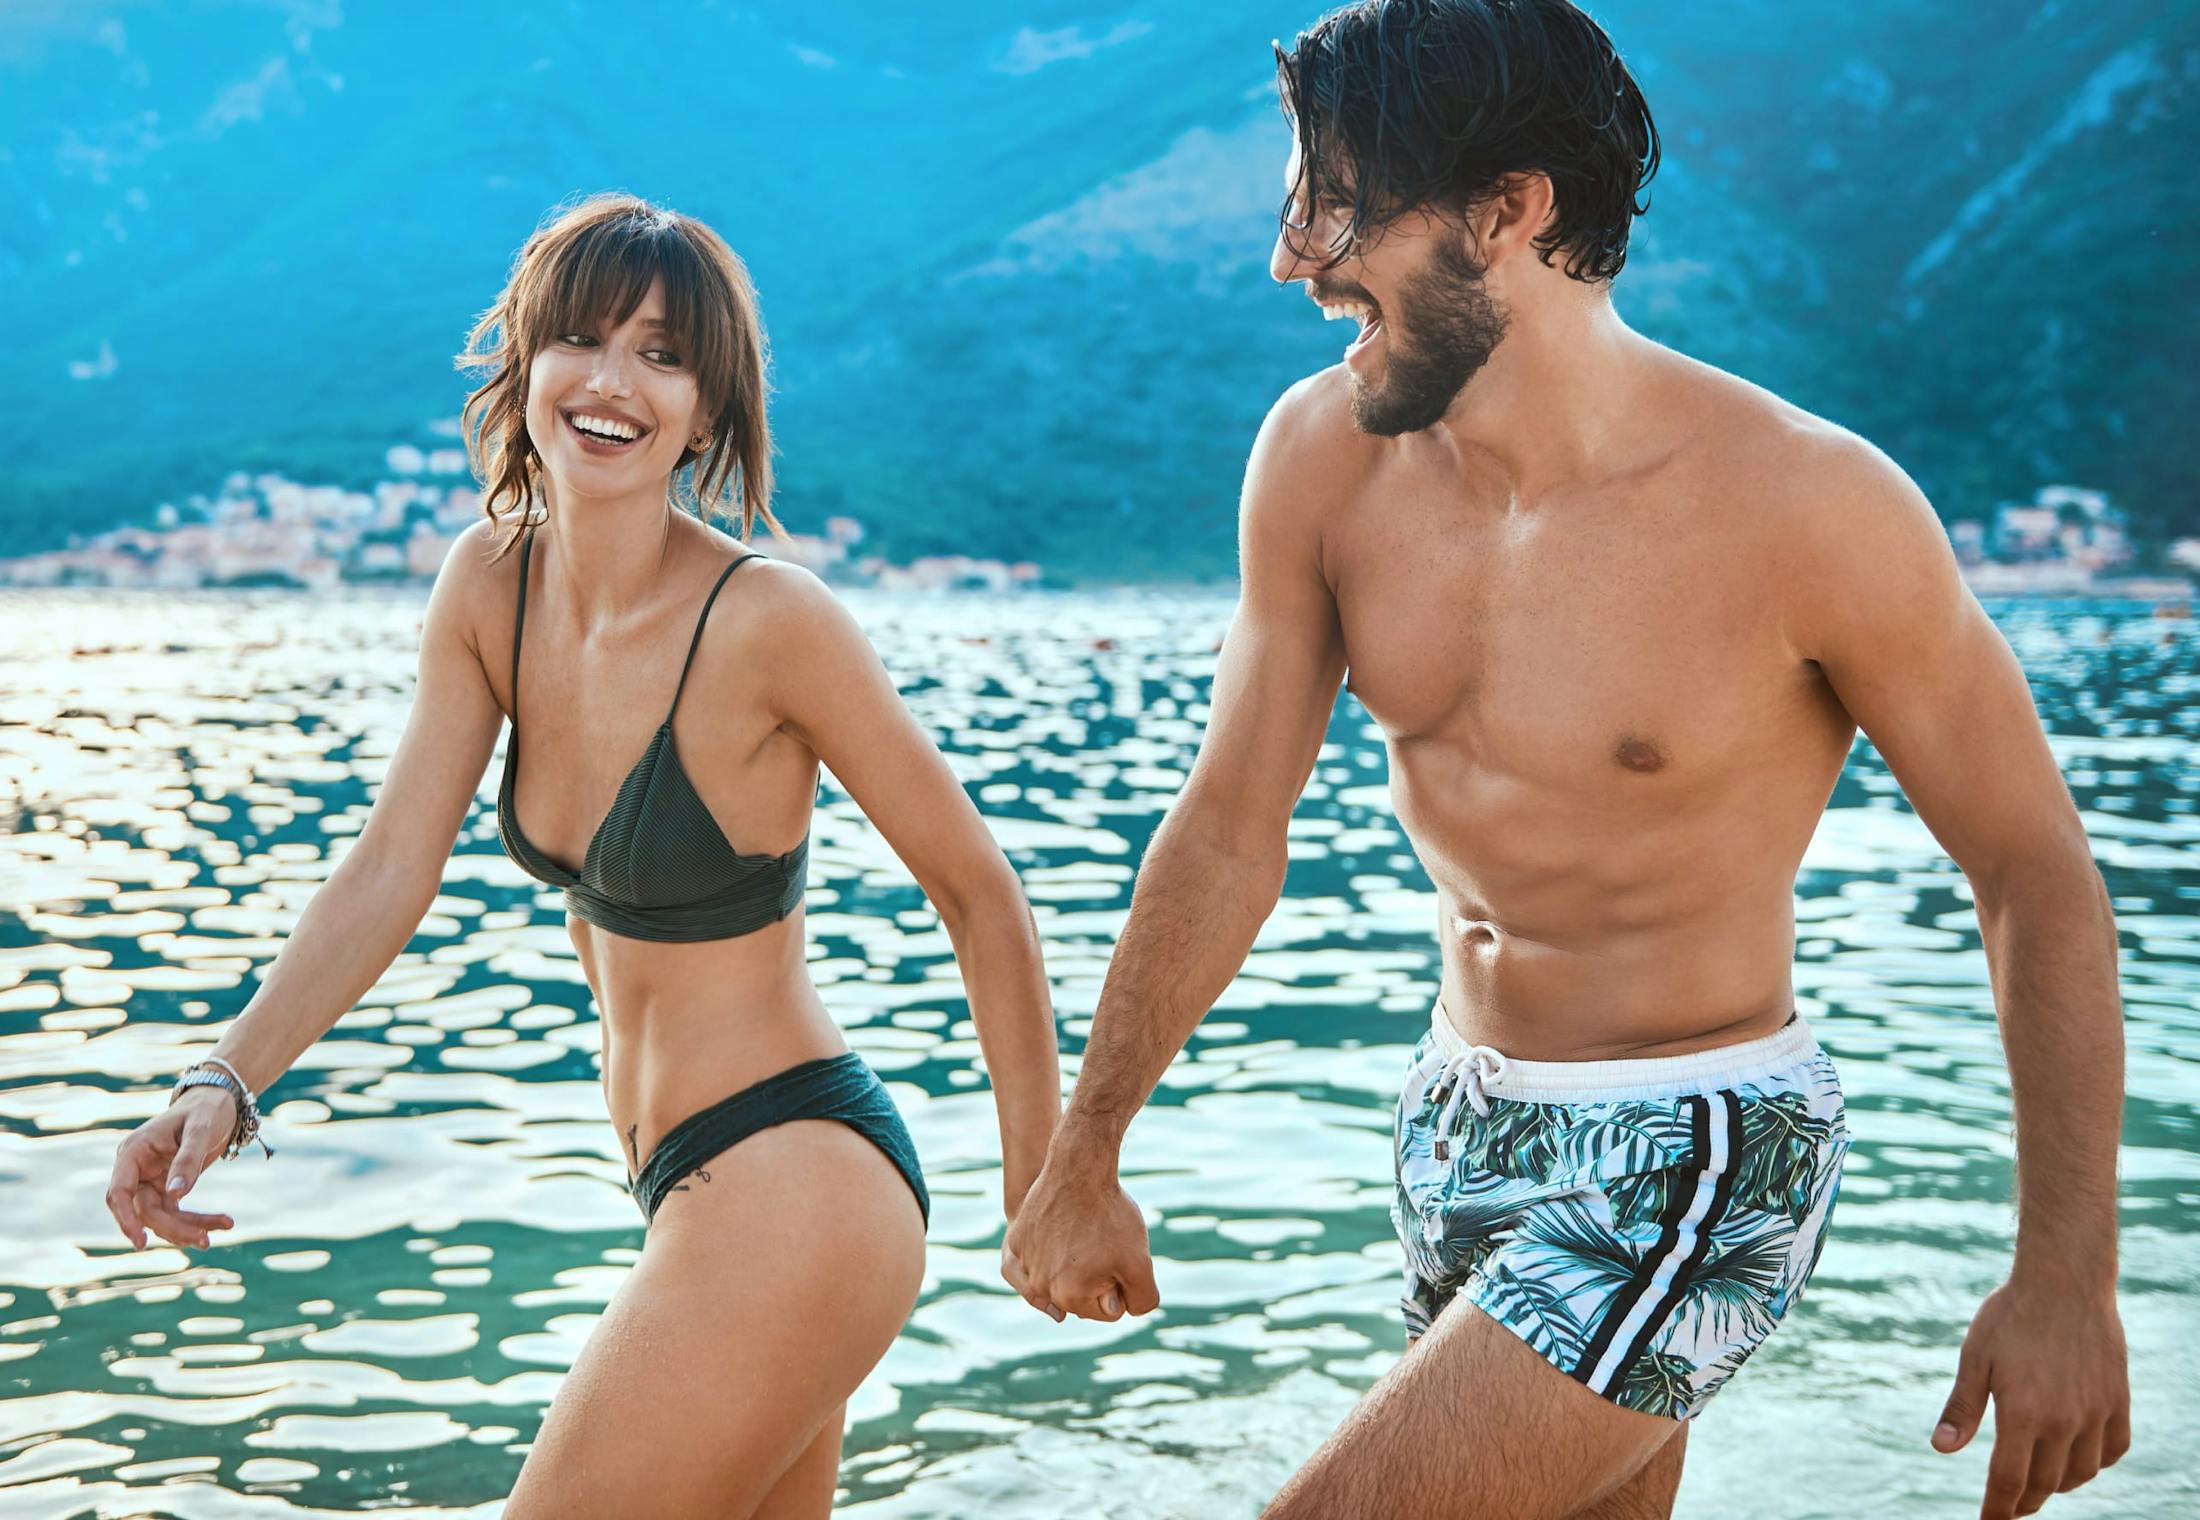 Man and woman walking in the water at the ocean wearing bathing suits